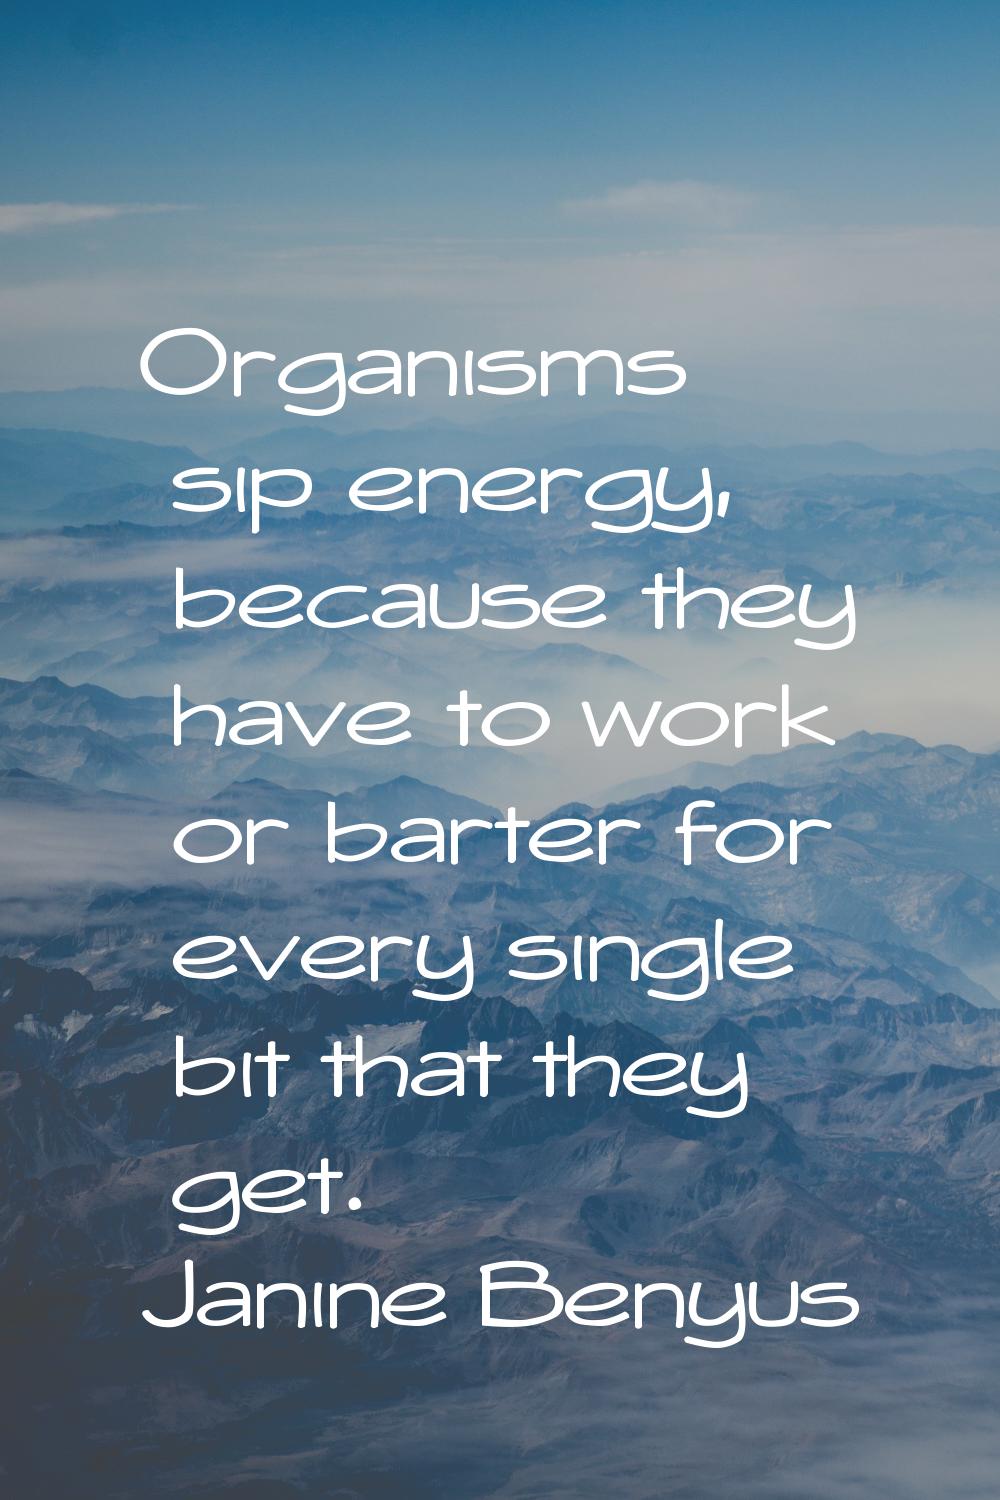 Organisms sip energy, because they have to work or barter for every single bit that they get.